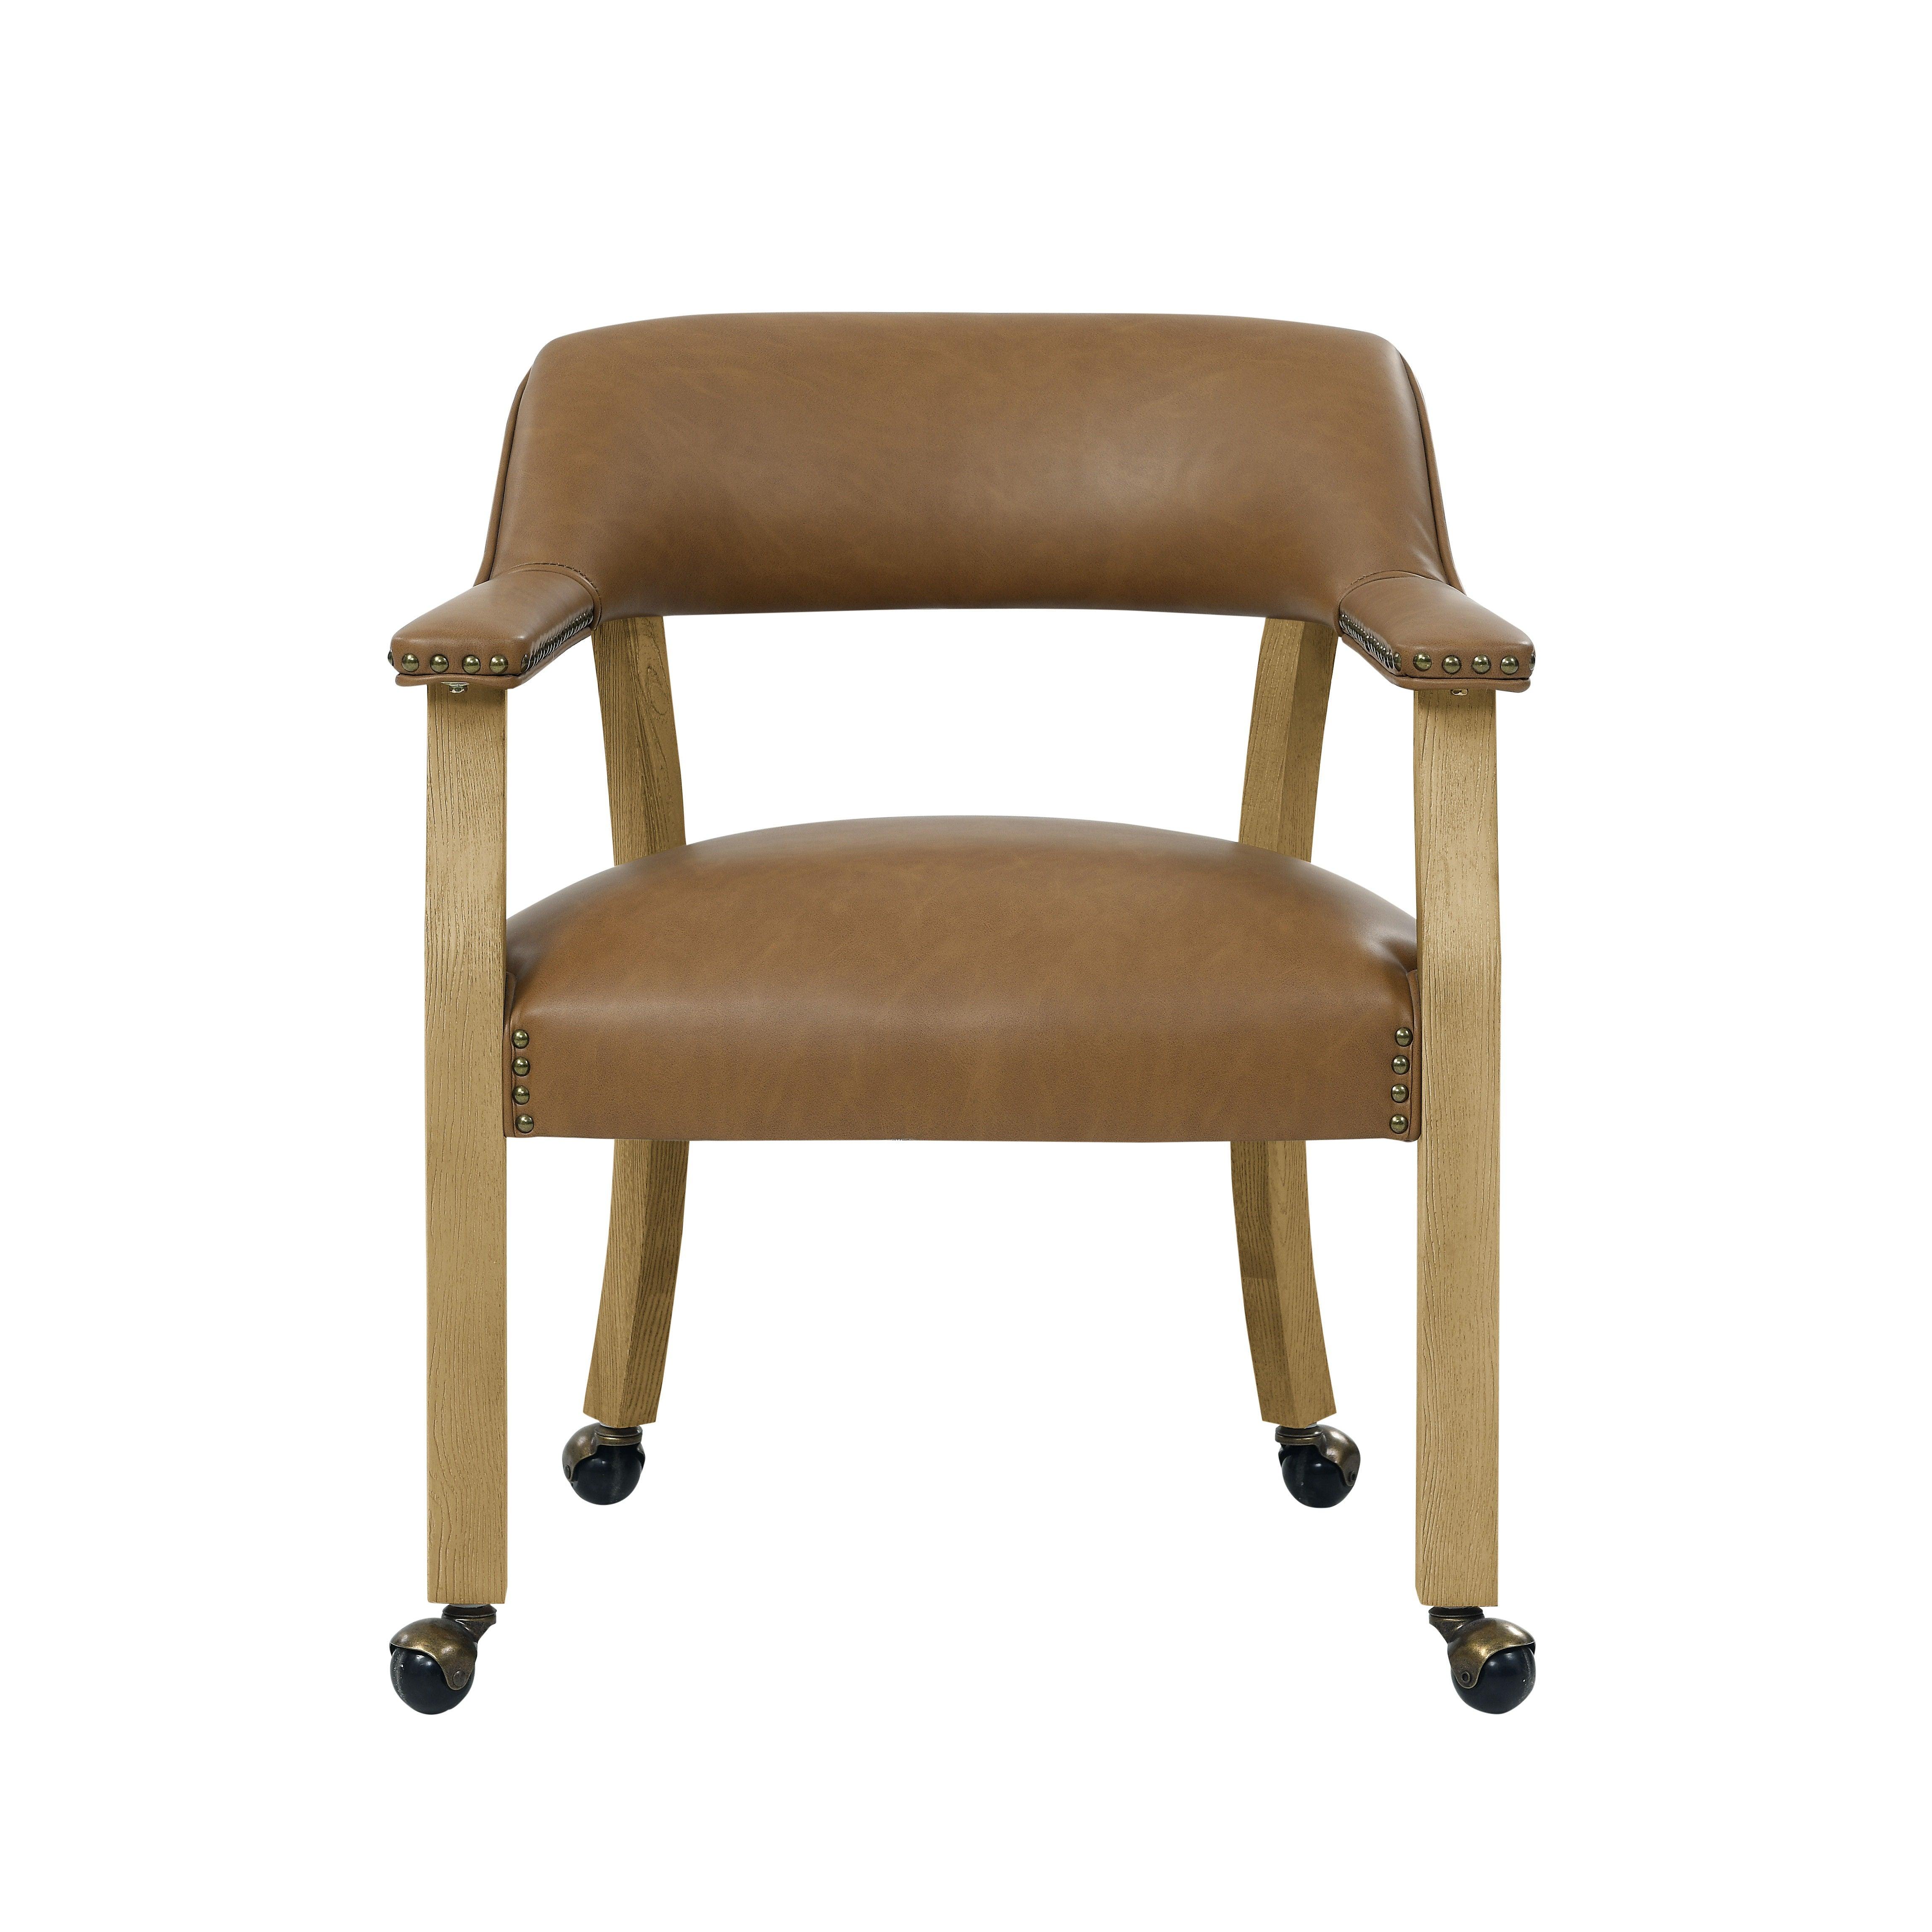 Steve Silver Furniture - Rylie - Castered Captain's Chair - Camel - 5th Avenue Furniture